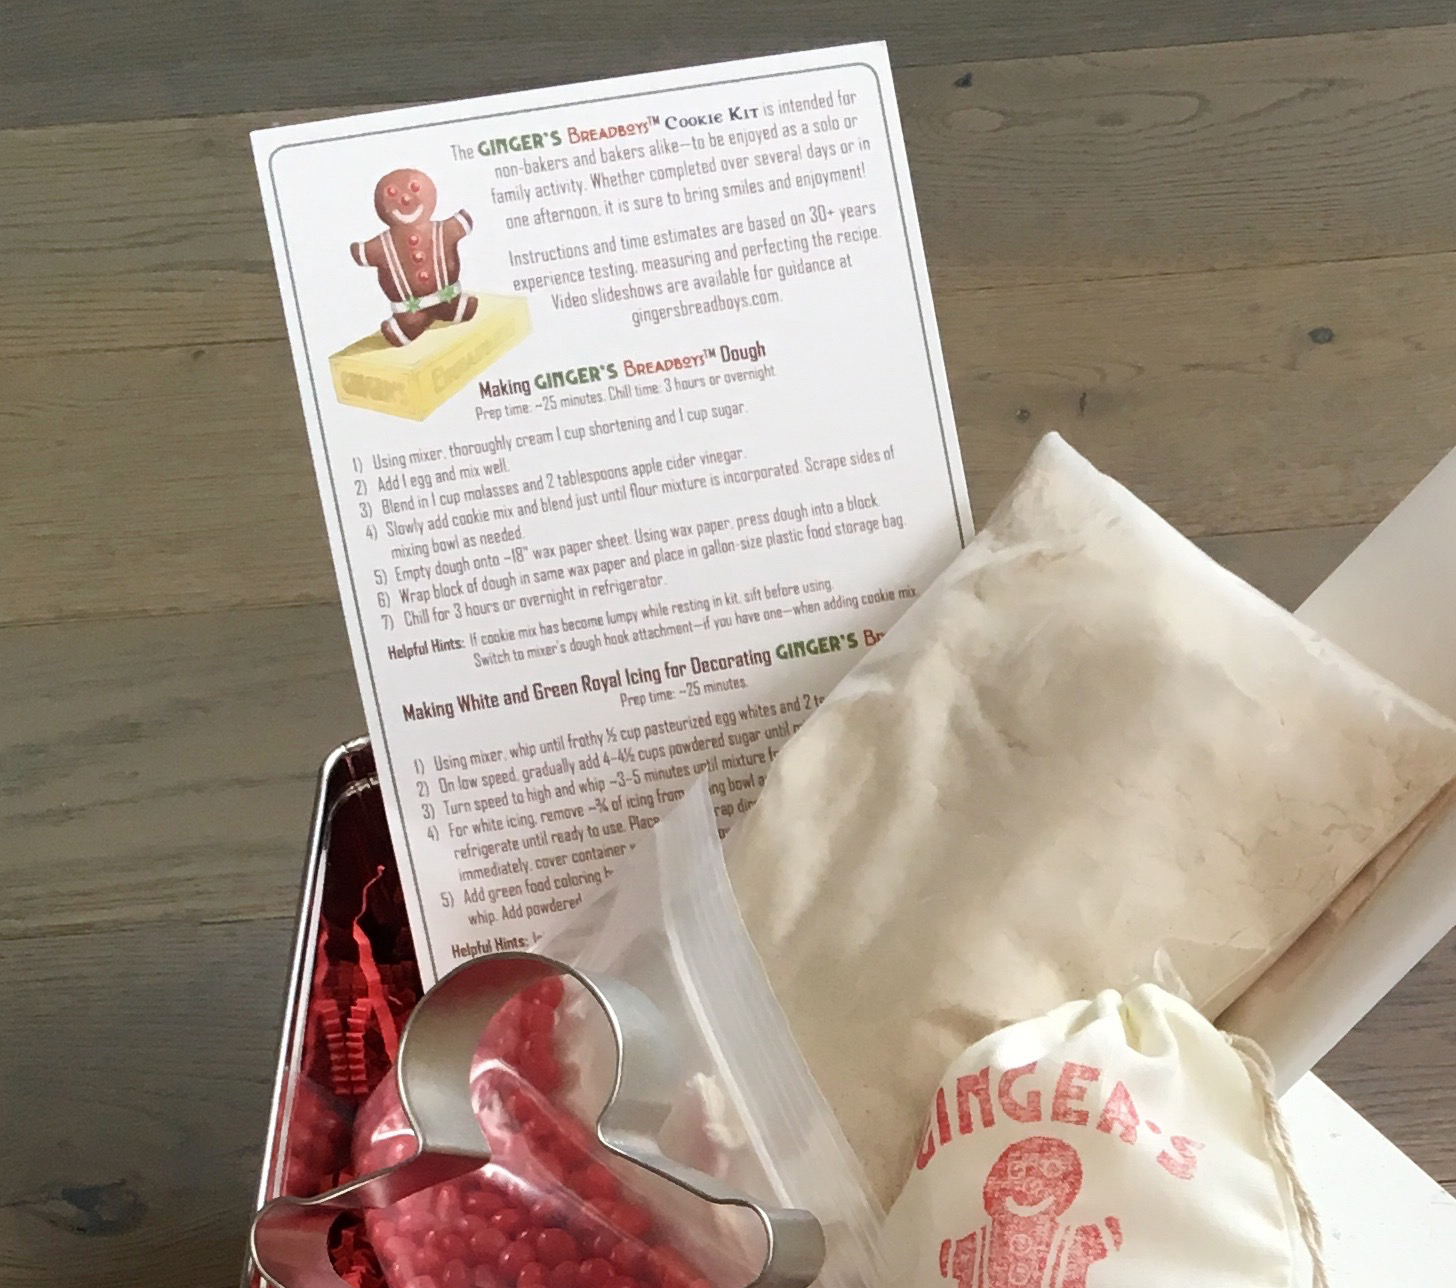 Gingerbread Recipe, cookie mix and instruction card from Ginger's Breadboys